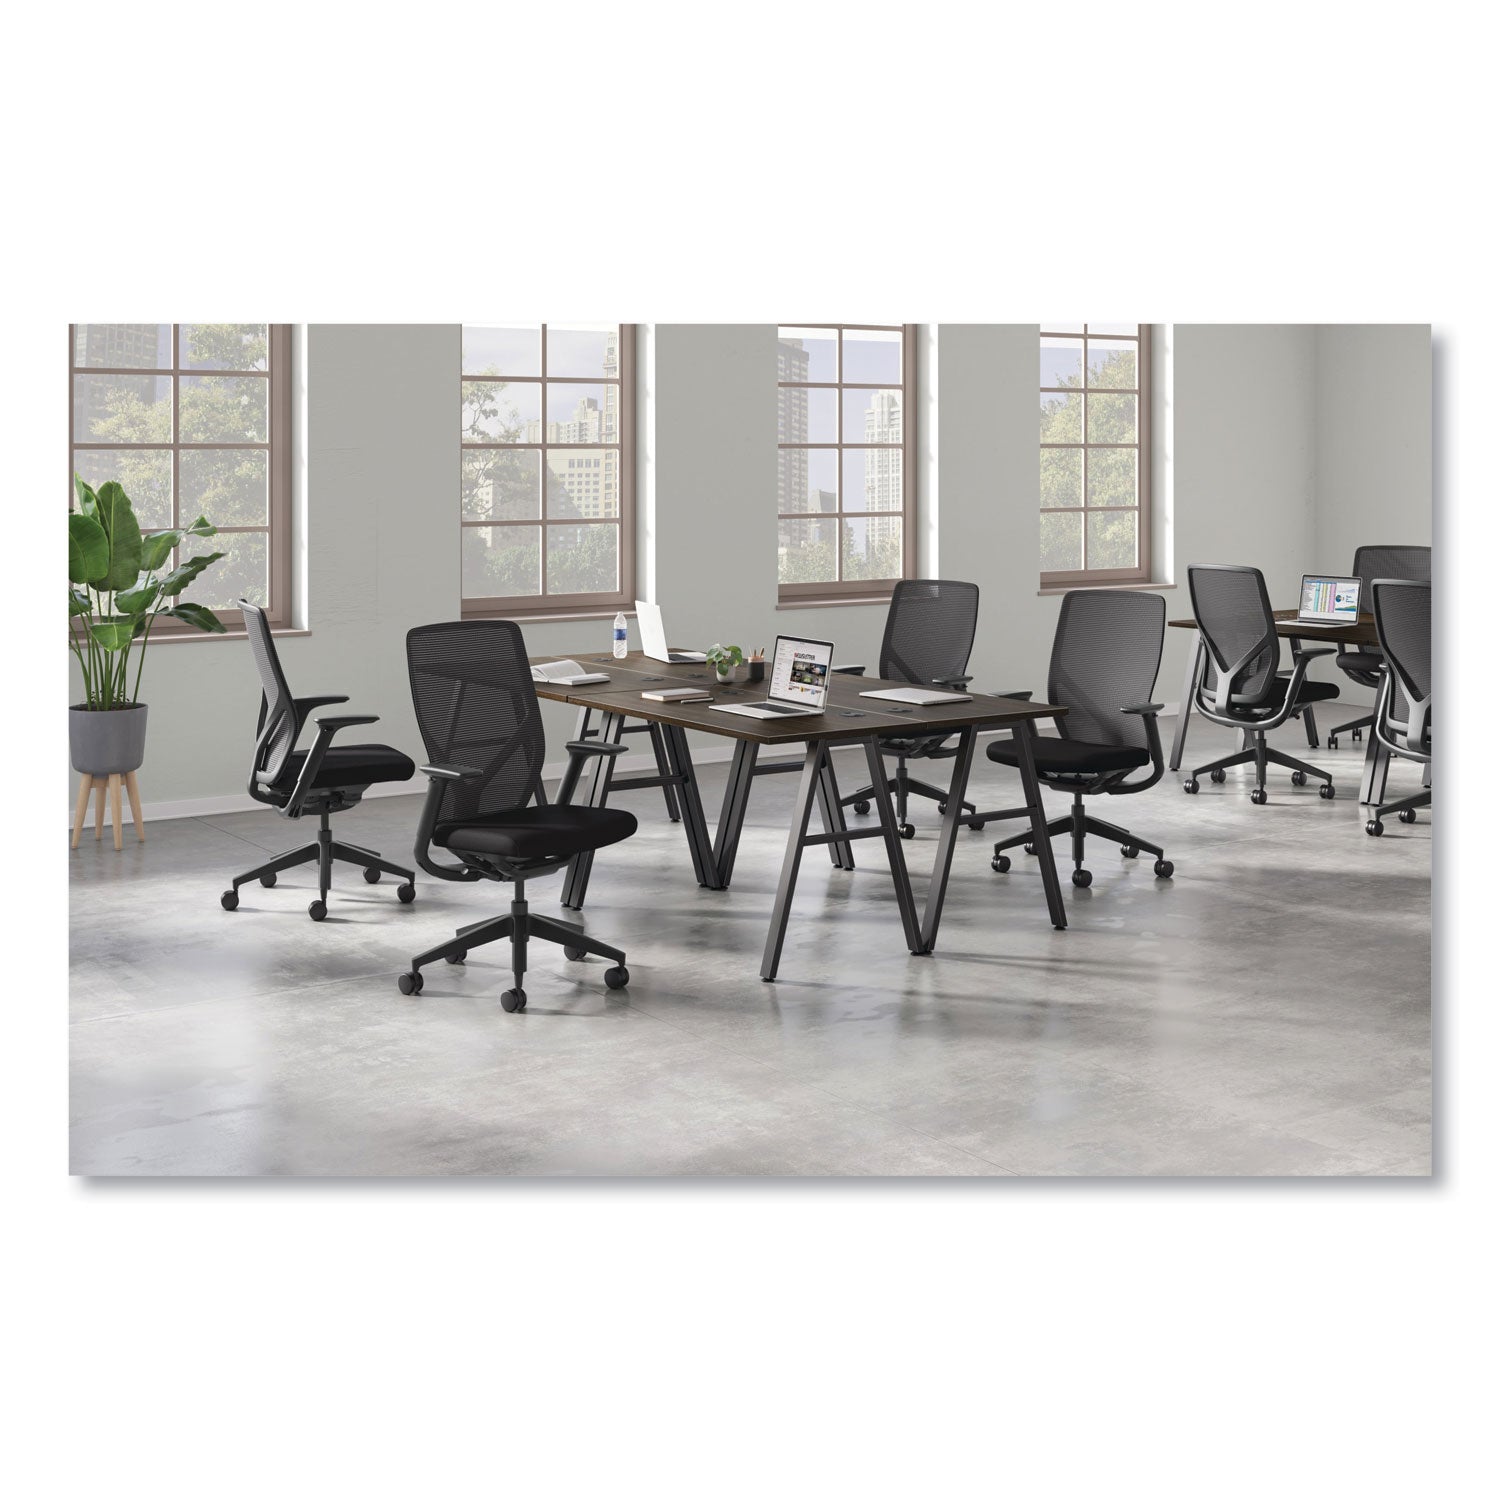 flexion-mesh-back-task-chair-up-to-300-lb-1481-to-197-seat-height-24-back-height-black-ships-in-7-10-business-days_honfxt0stamu10t - 3